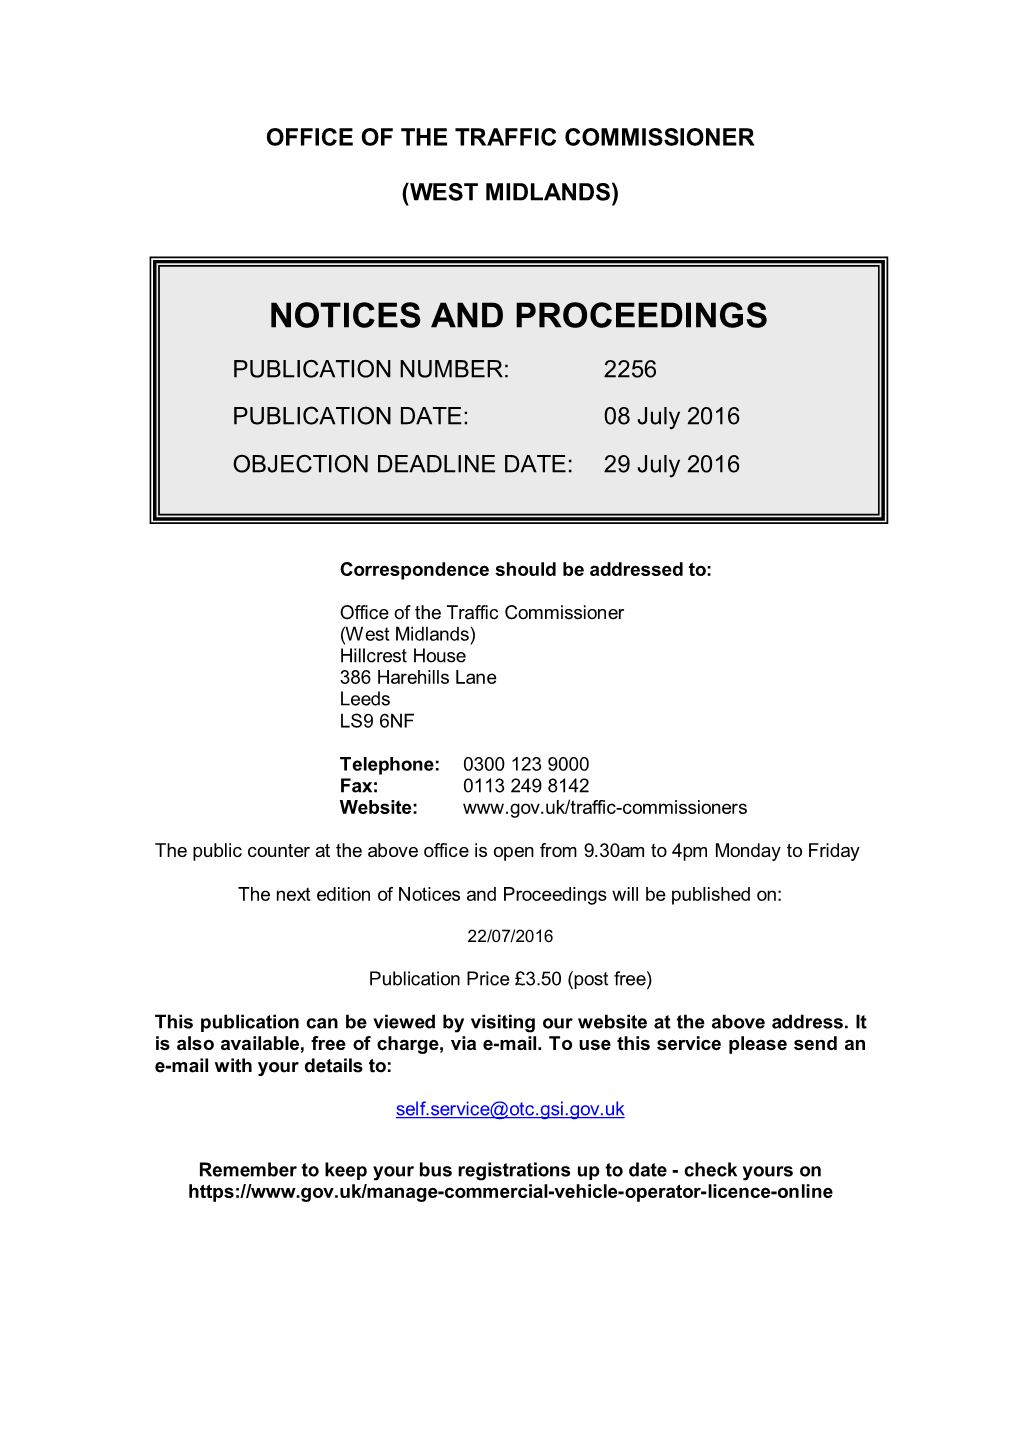 Notices and Proceedings: West Midlands: 08 July 2016